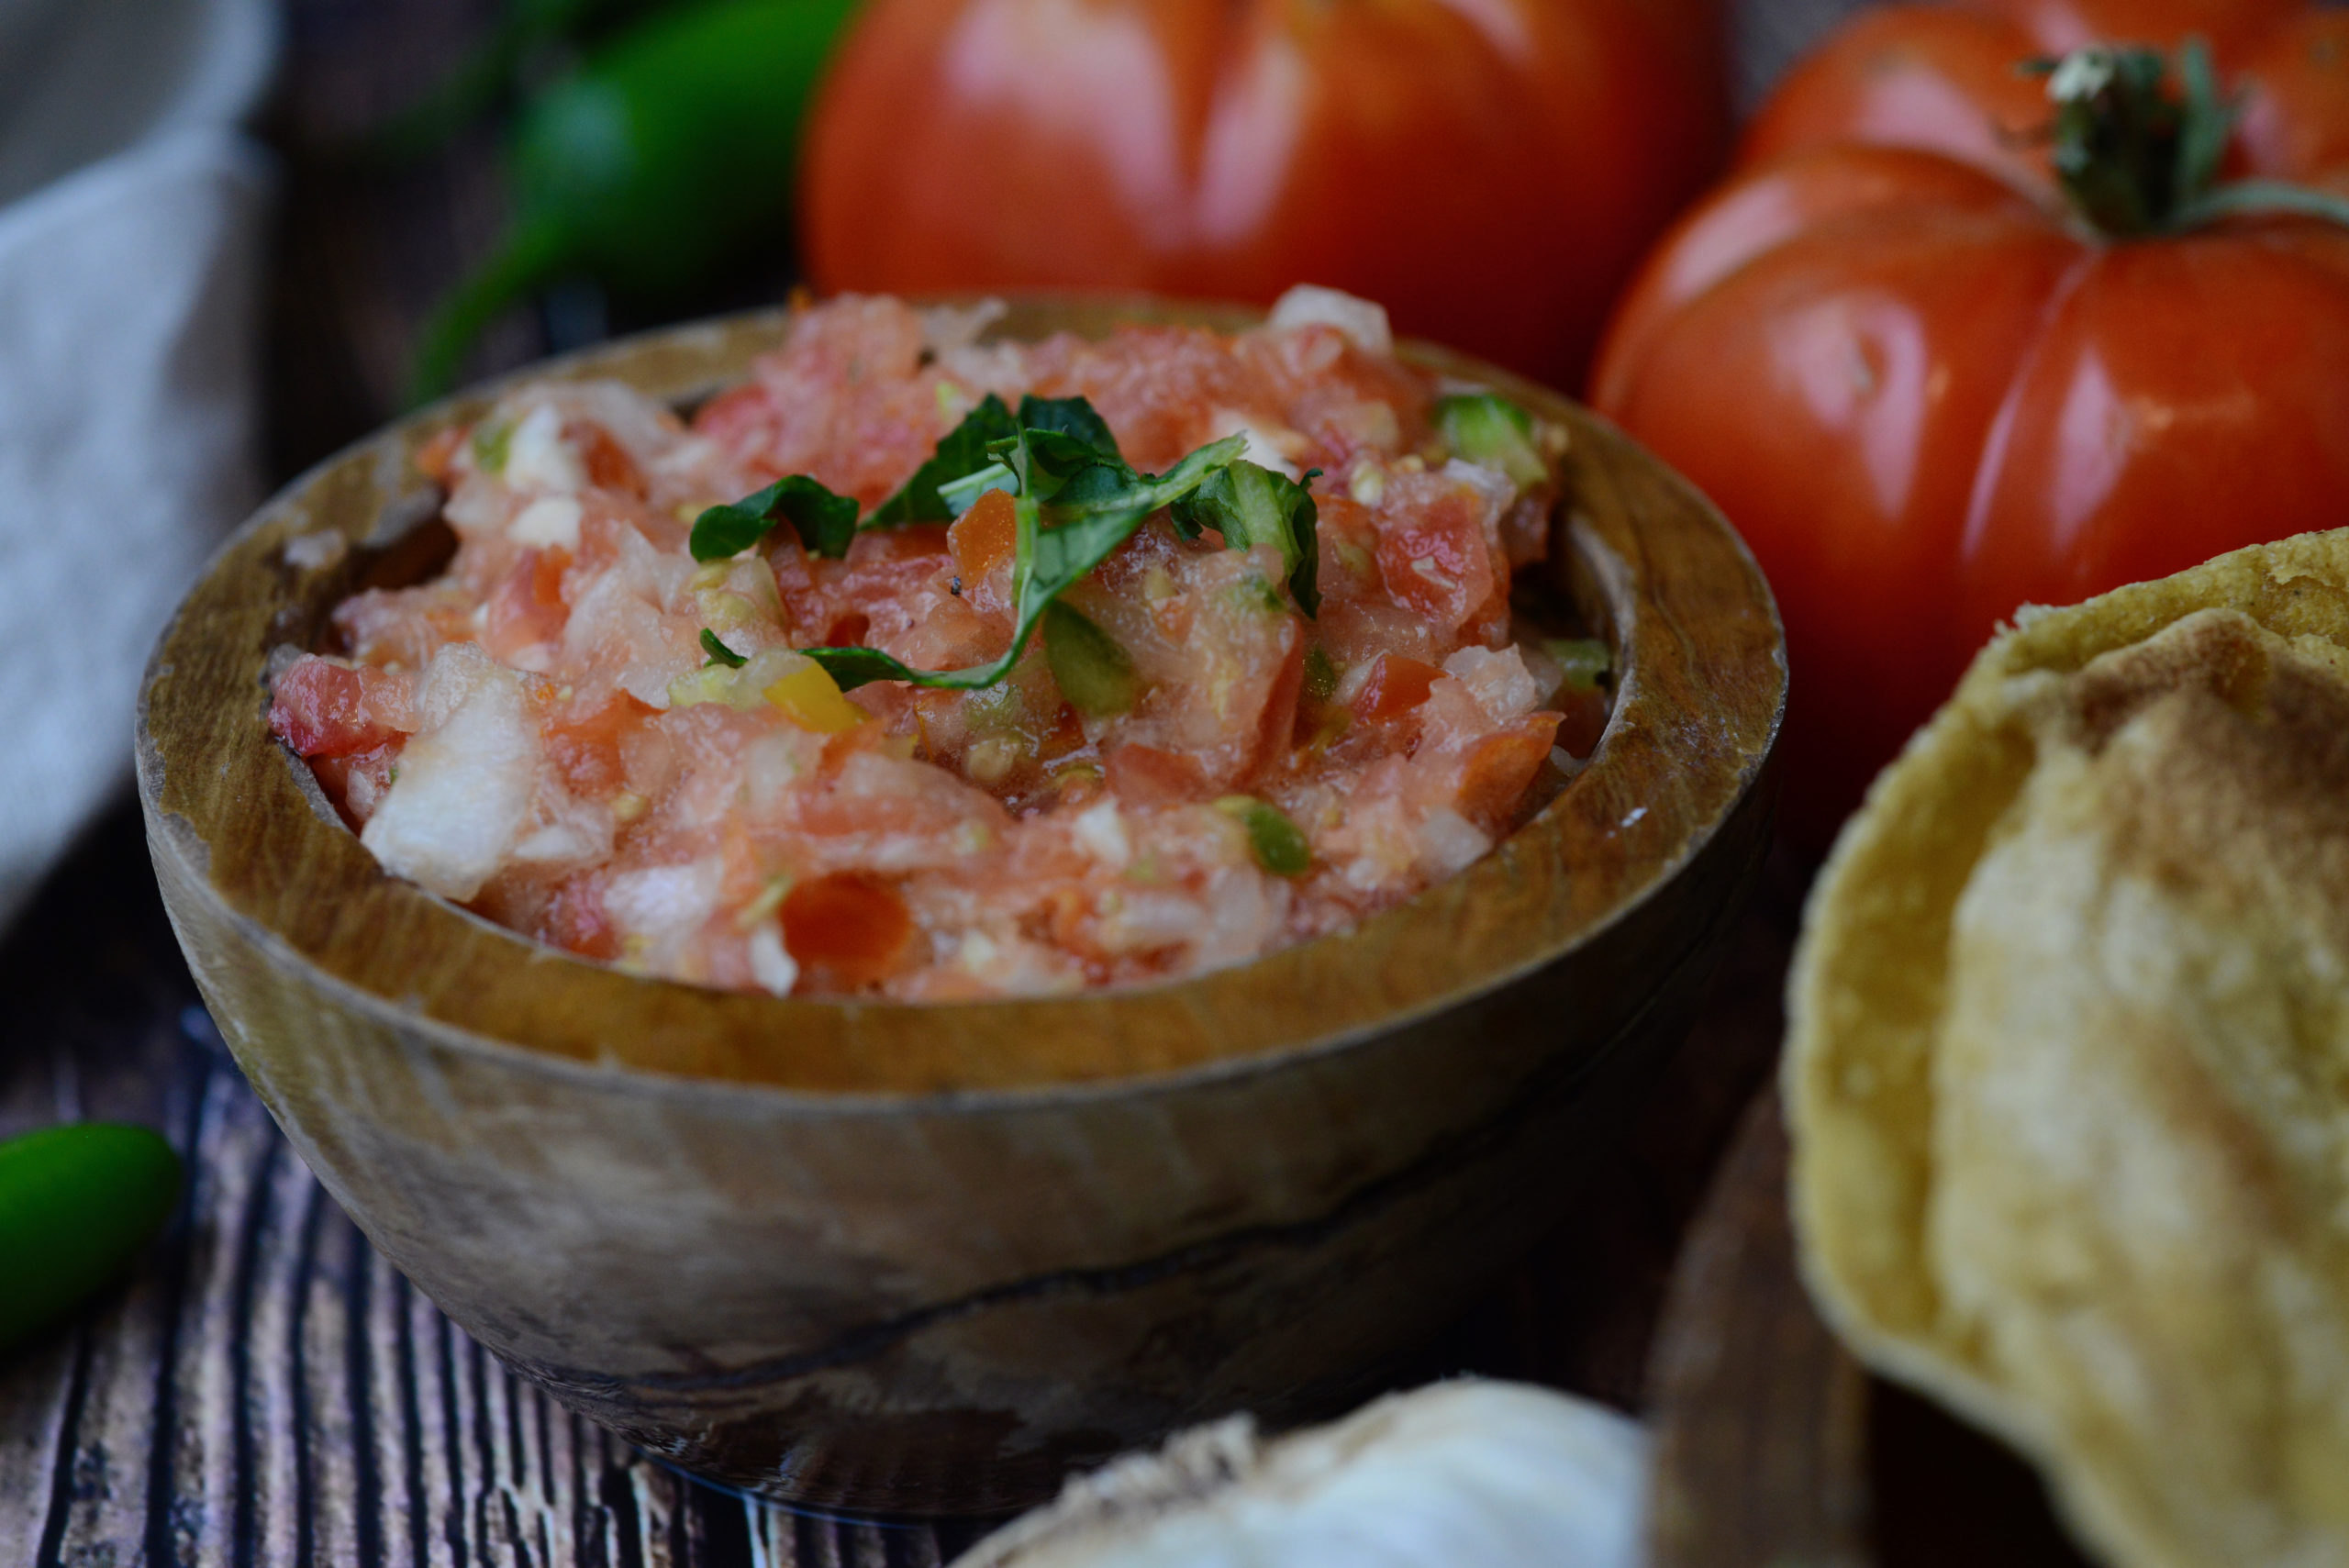 Pico de Gallo [Fresh Raw Salsa] surrounded by tomatoes, garlic, and toasted tortillas